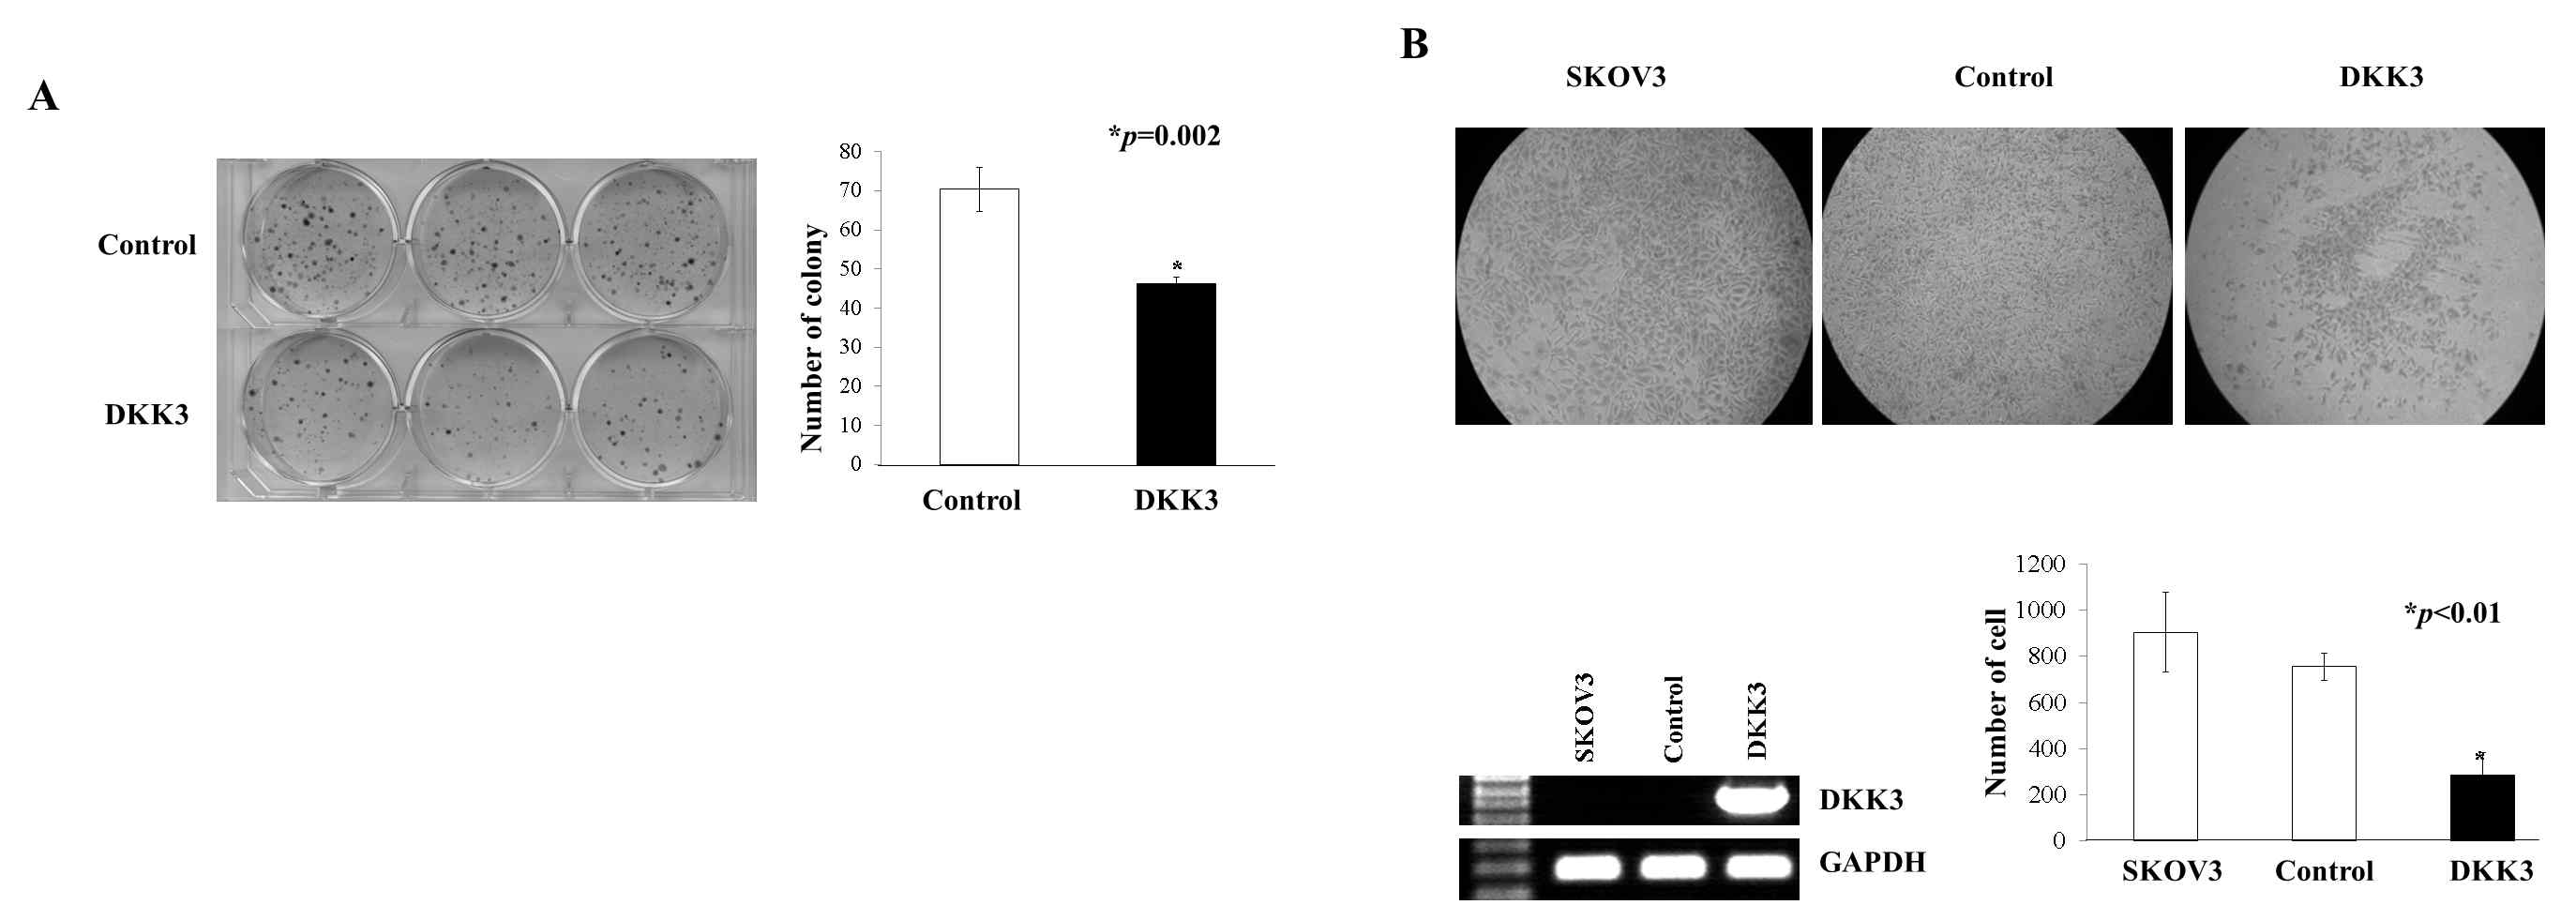 Anti-proliferative and anti-invasive effect of DKK3. (A) Colony formation assay using SKOV3 ovarian cancer cells showed that the colony formation activity of the DKK3-transfected cells was markedly less than that in the control vector-transfected cells (P=0.002). As control vector, pcDNA3.1(-)-DKK3 was used. (B) The invasion capacity of DKK3-expressing SKOV3 cells was less than parental SKOV3 and control vector-transfected SKOV3 cells (P<0.01). The expression of DKK3 was determined by RT-PCR and GAPDH was used as a loading control. These results are representative of three independent experiments